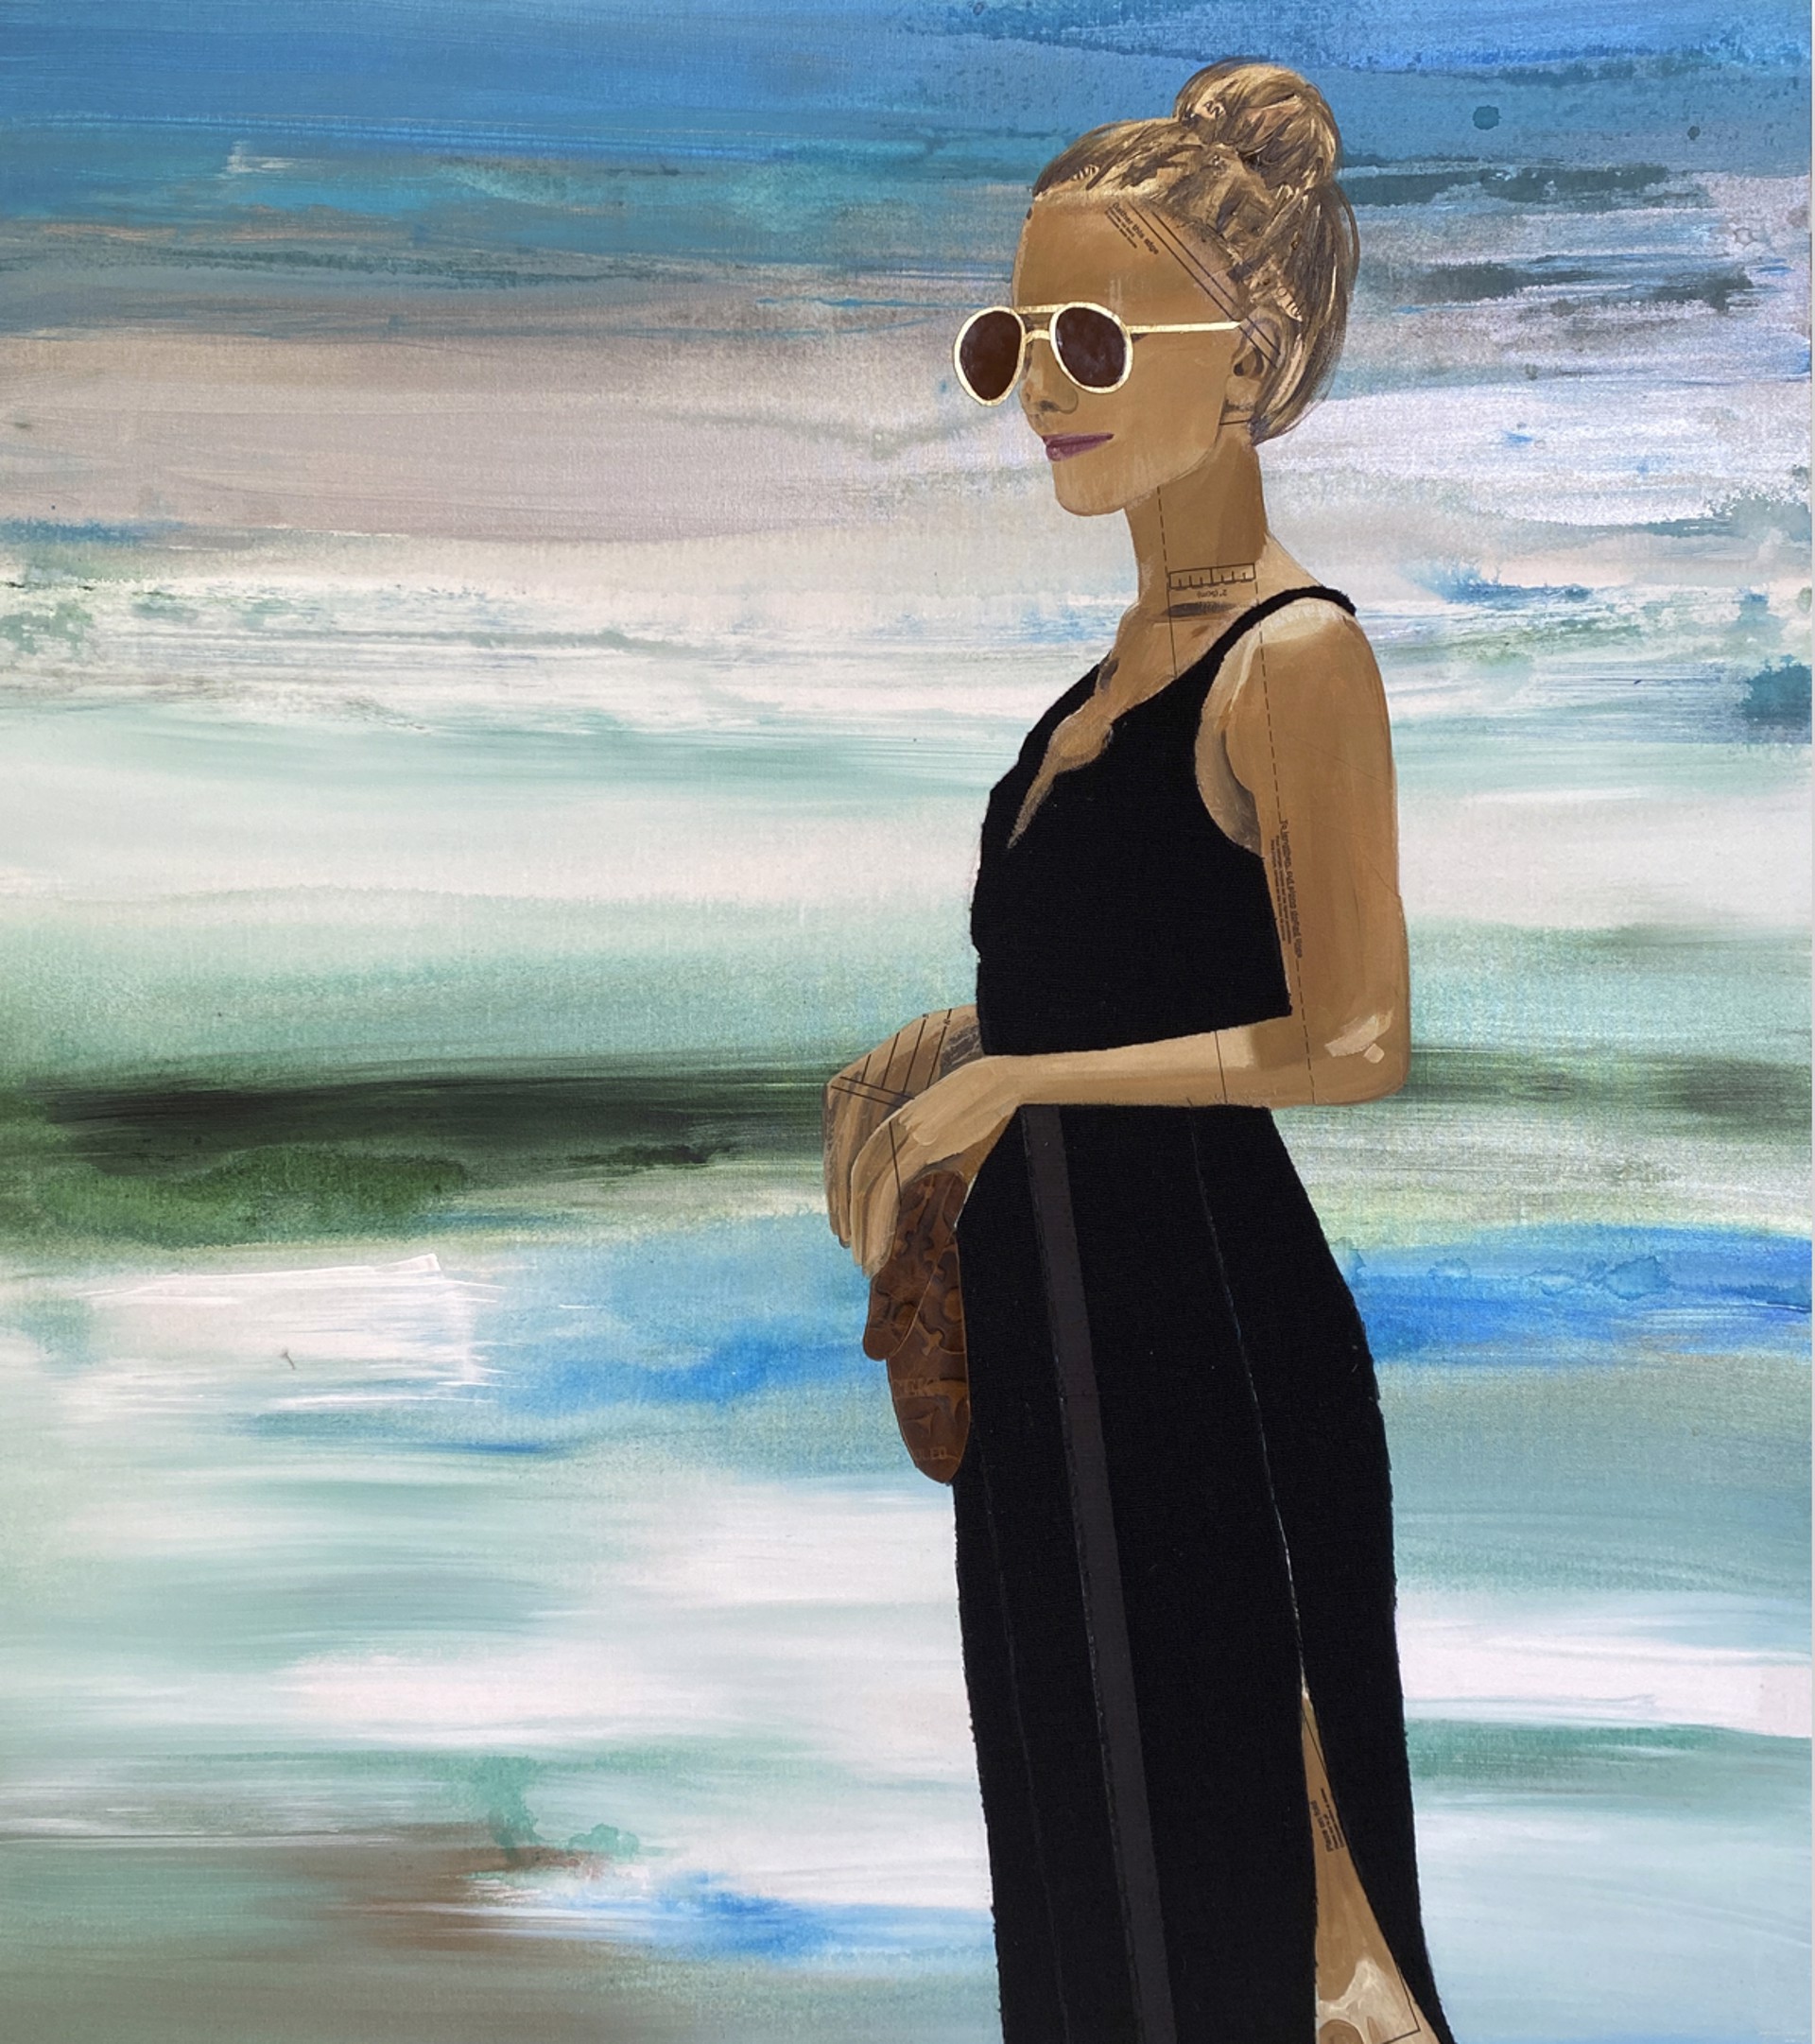 Koa & Ice is a mixed media painting by California artist painter Kelsey Irvin featuring a blonde woman with white glasses on an abstract beach.